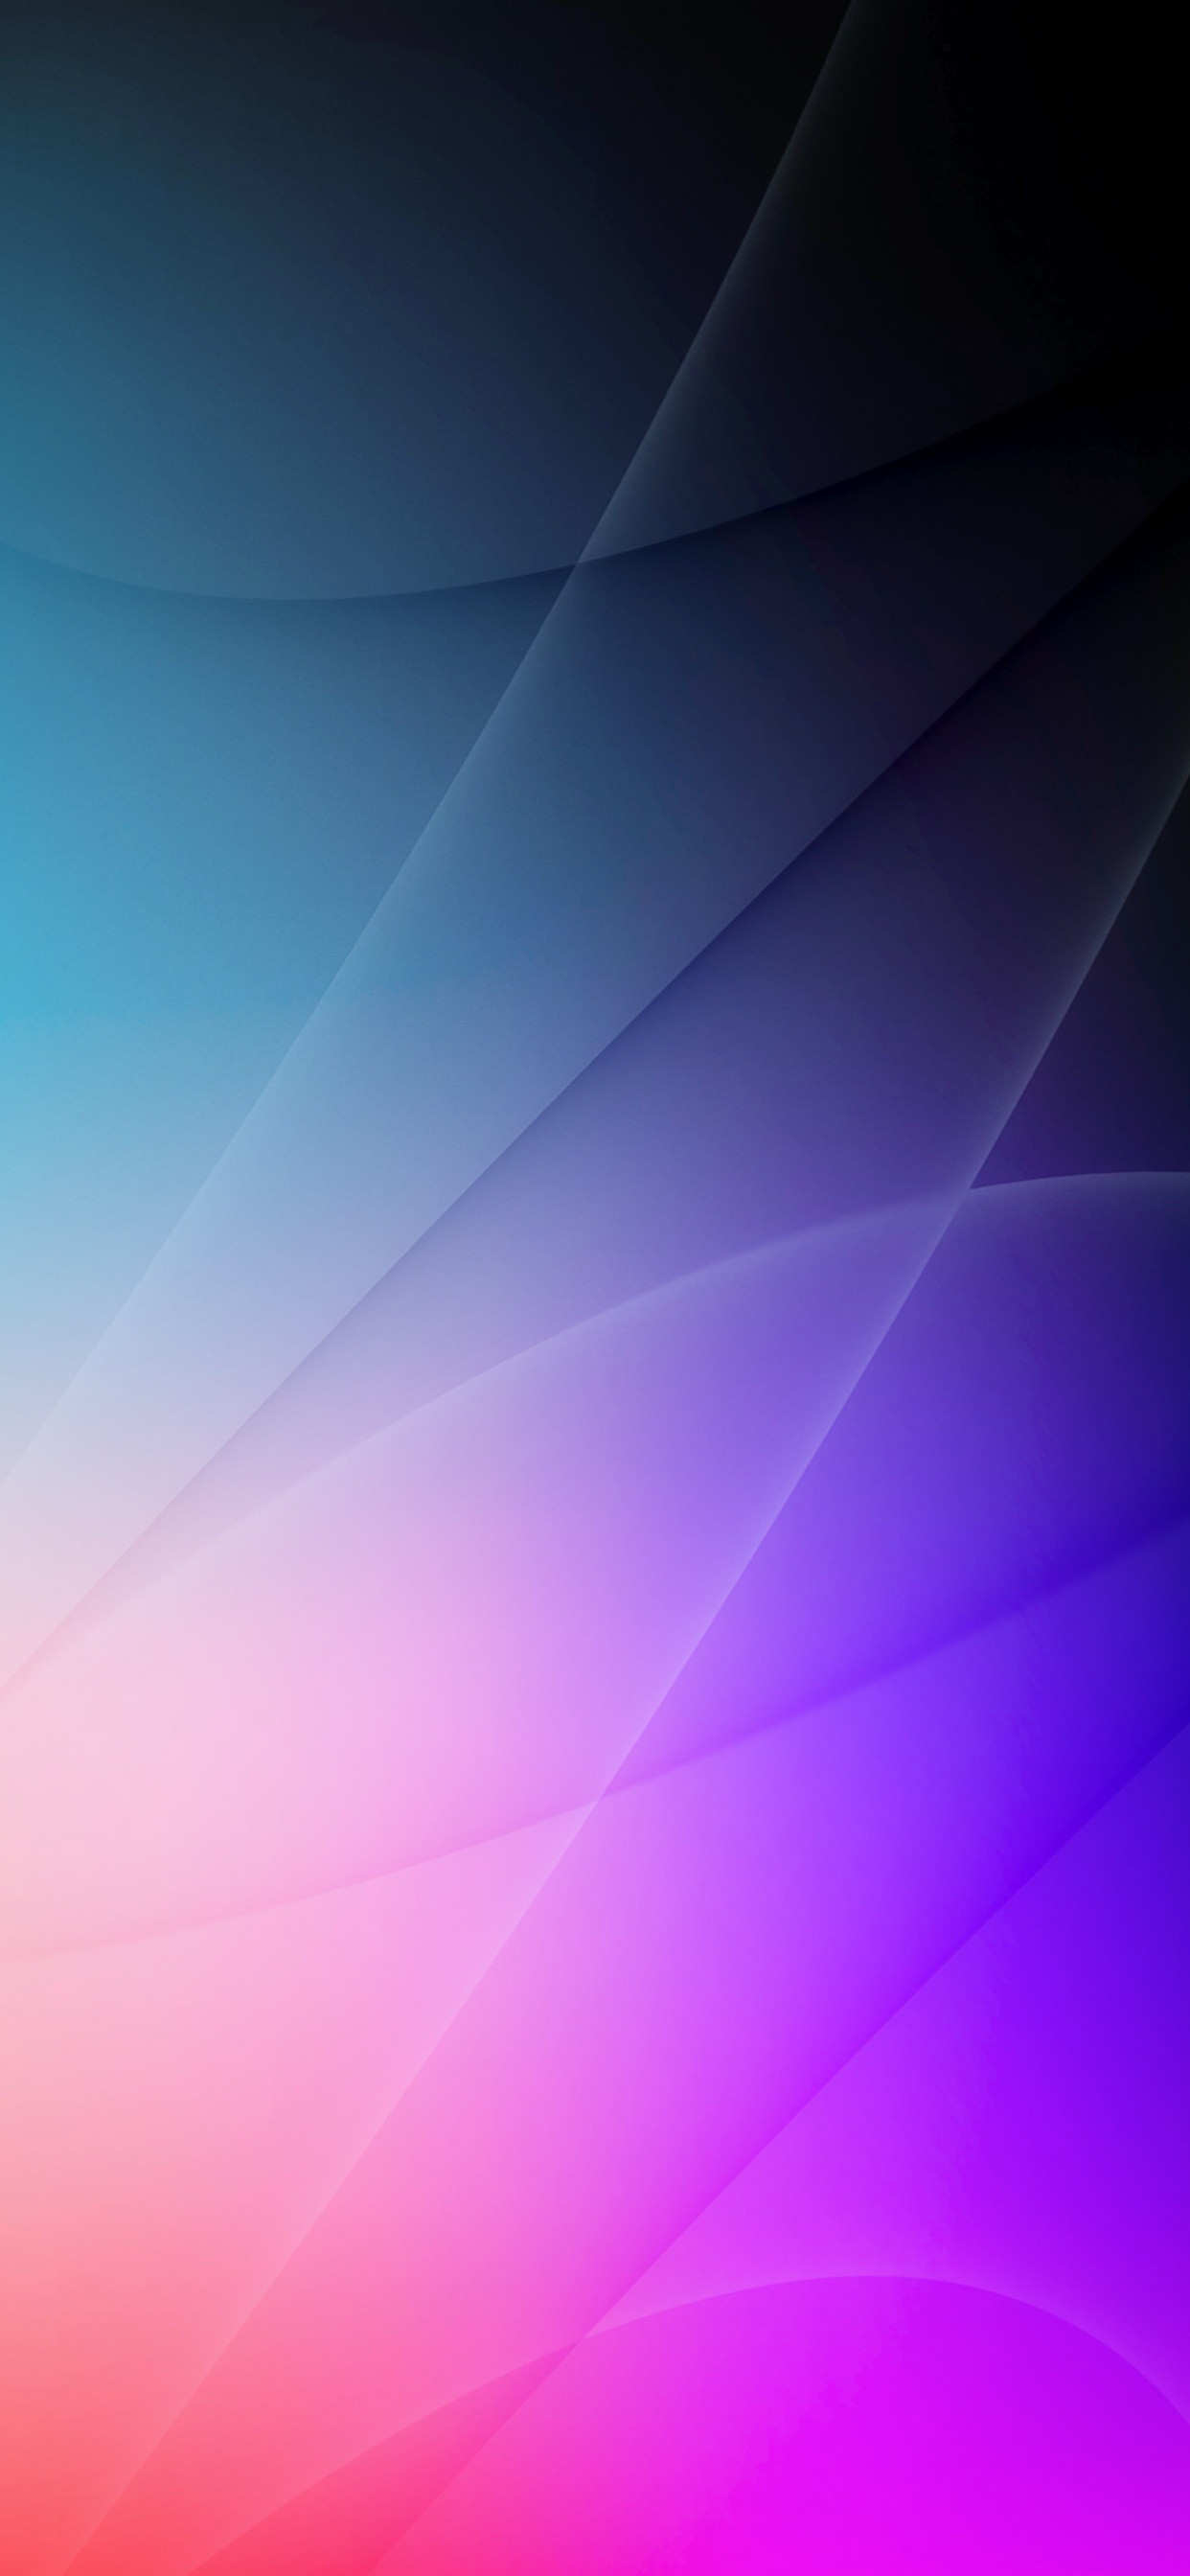 Atmosphere, Colorfulness, Blue, Purple, Violet. Wallpaper in 1242x2688 Resolution